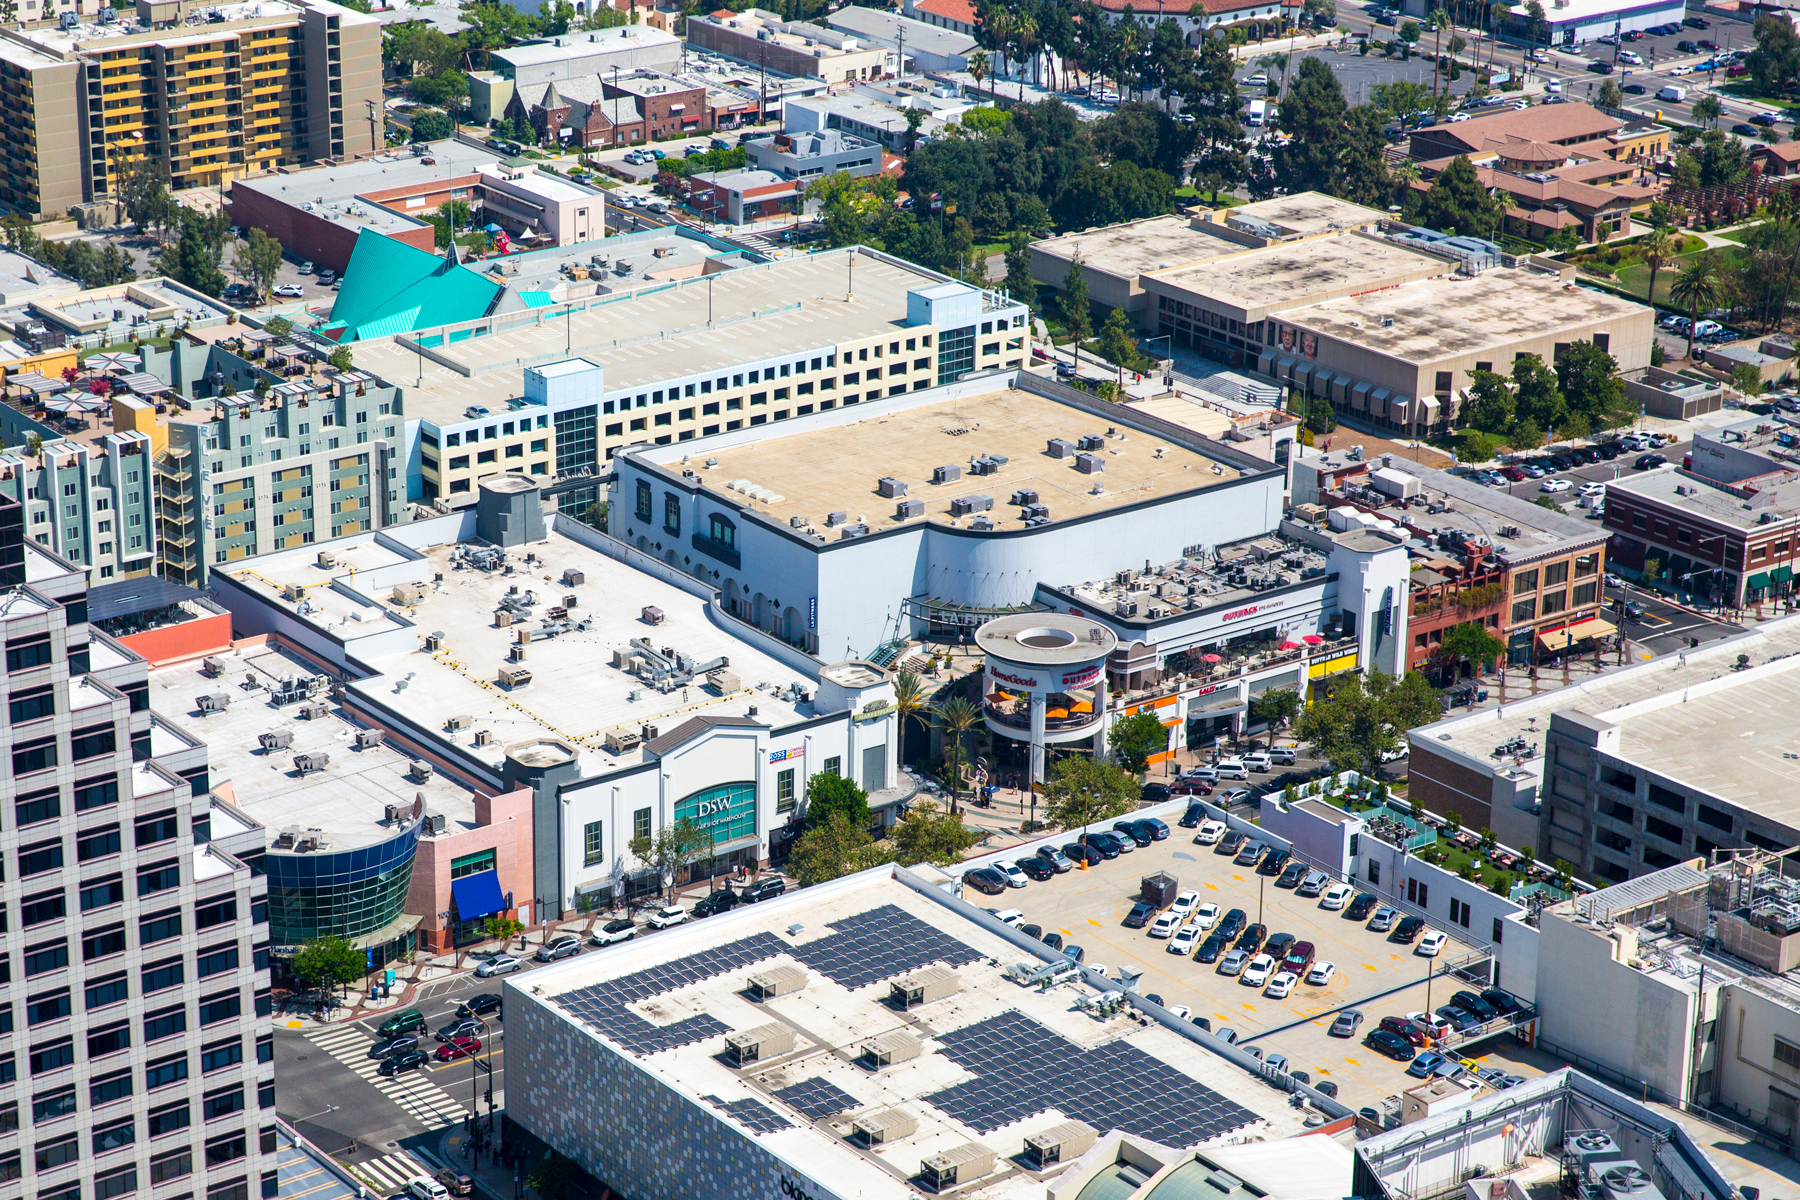 Pine Tree acquires $64 million urban shopping center in the heart of downtown Glendale, CA